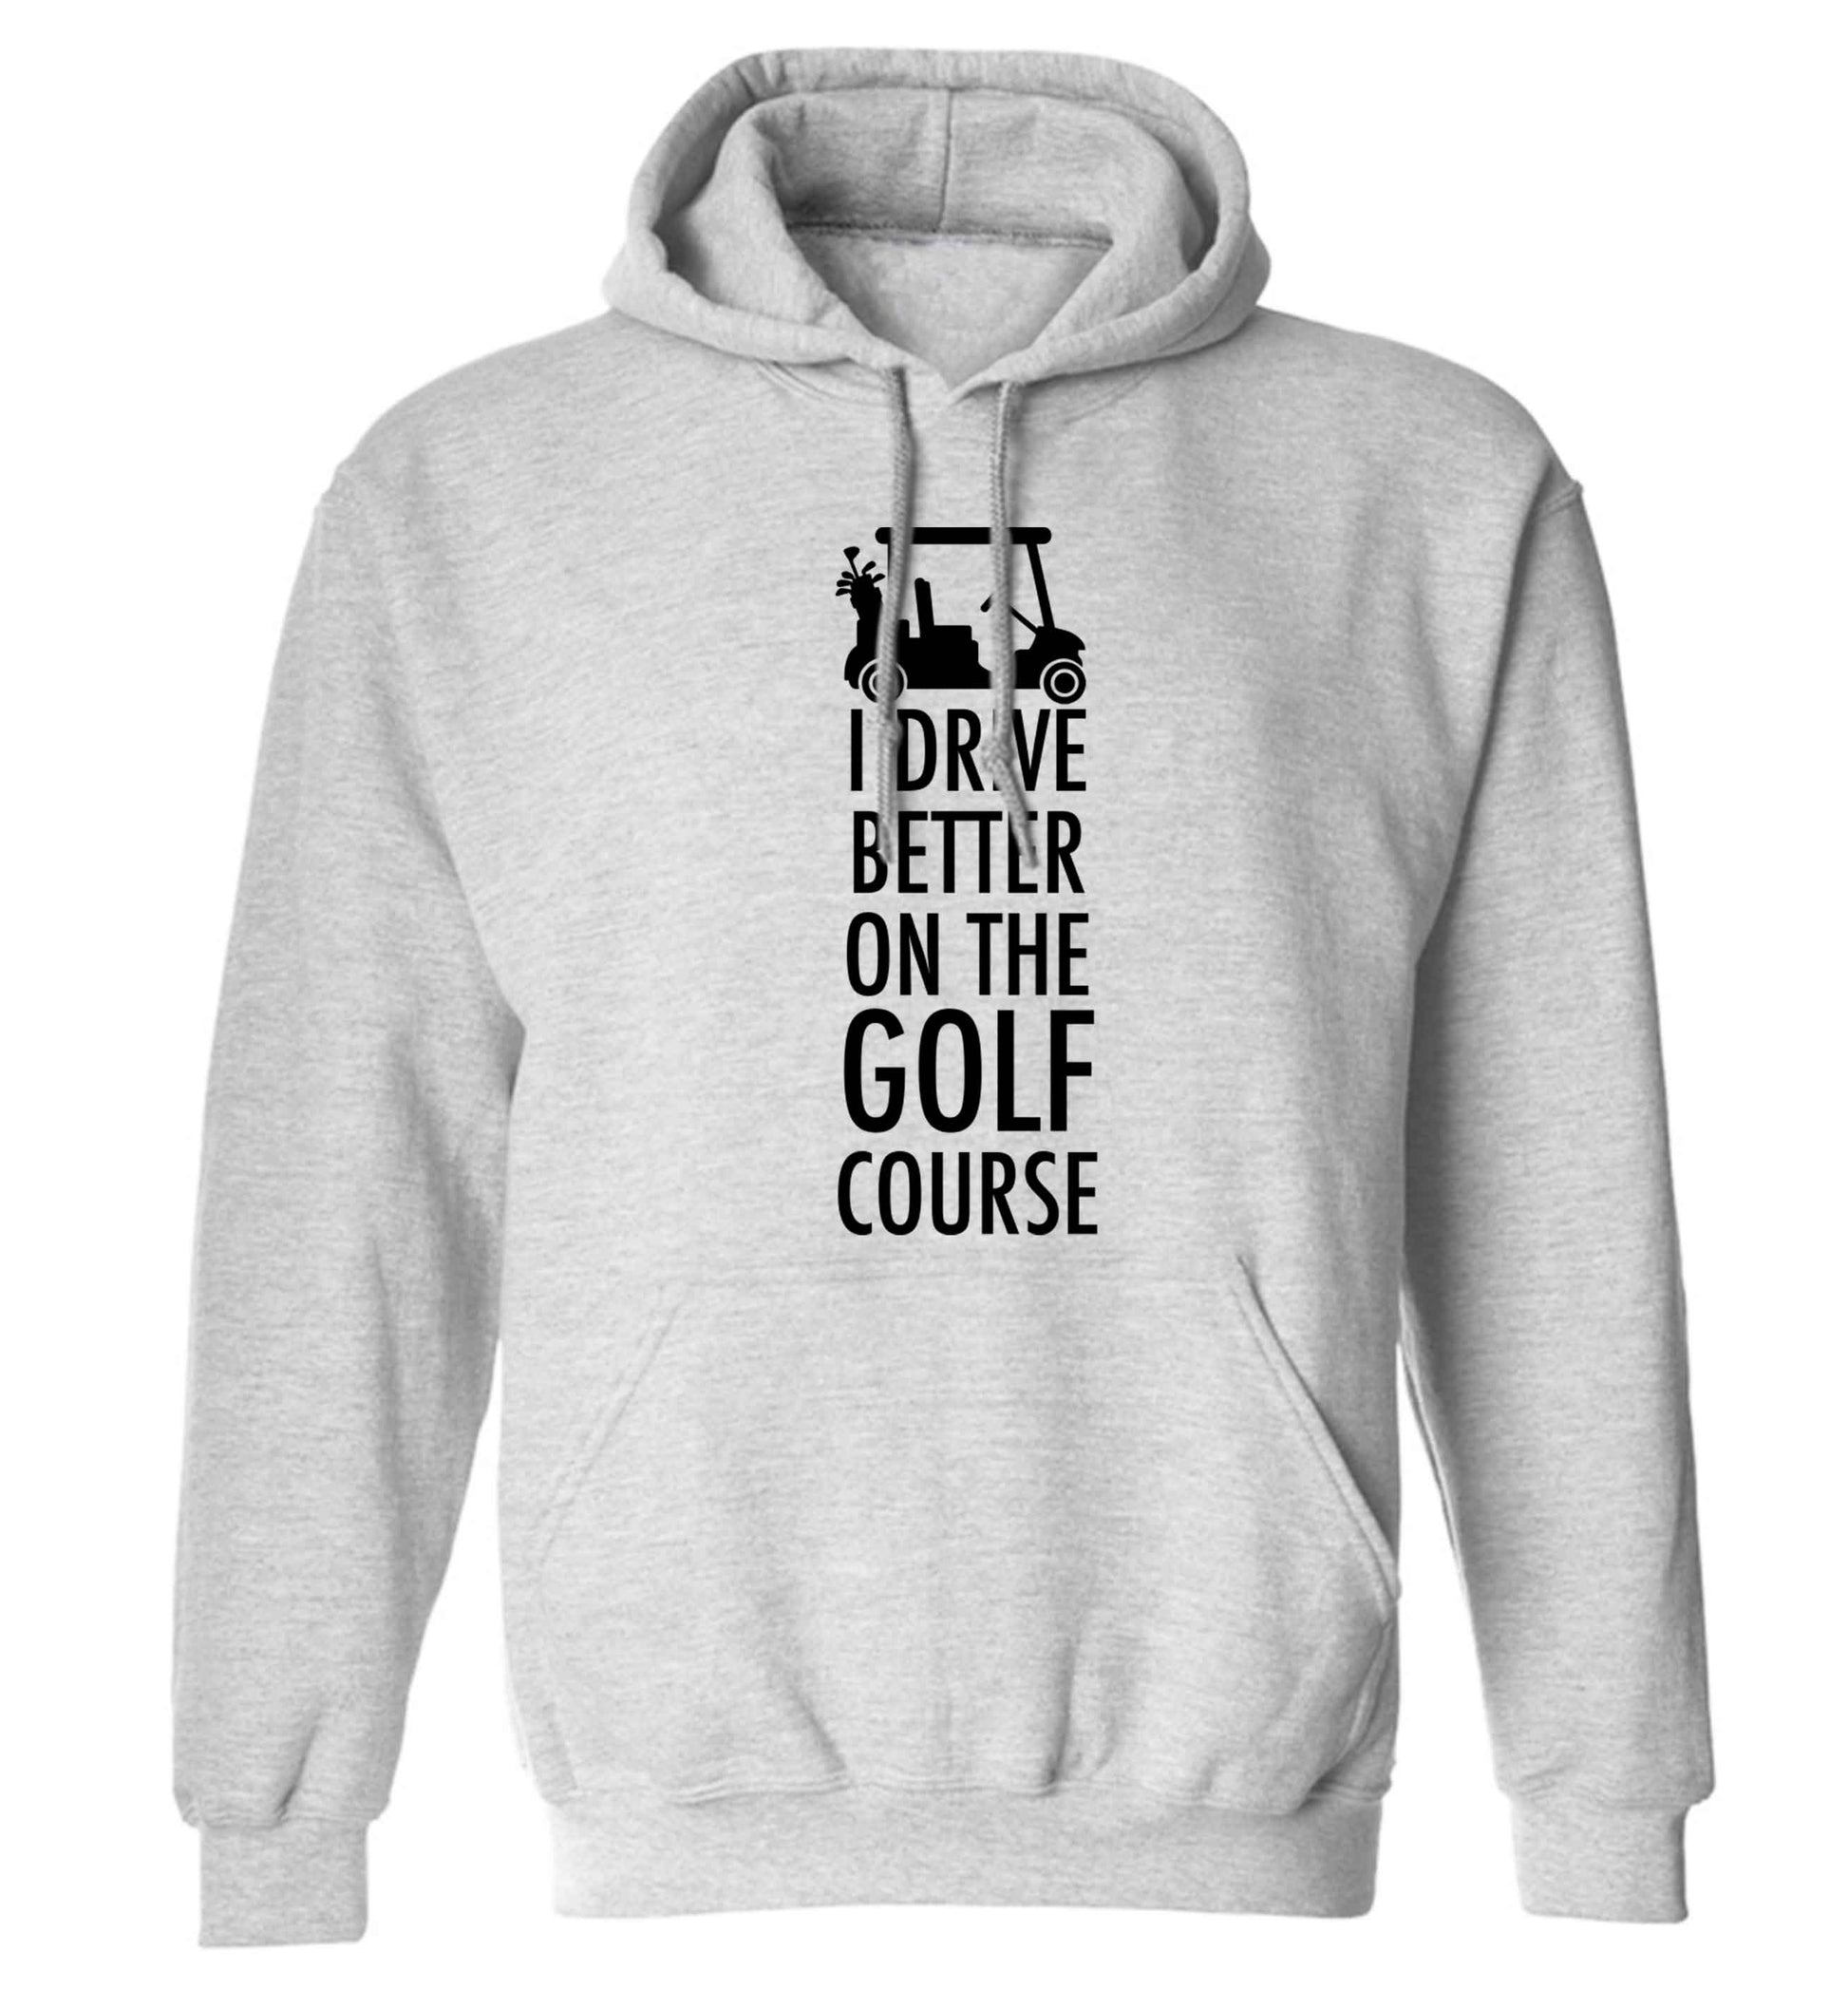 I drive better on the golf course adults unisex grey hoodie 2XL